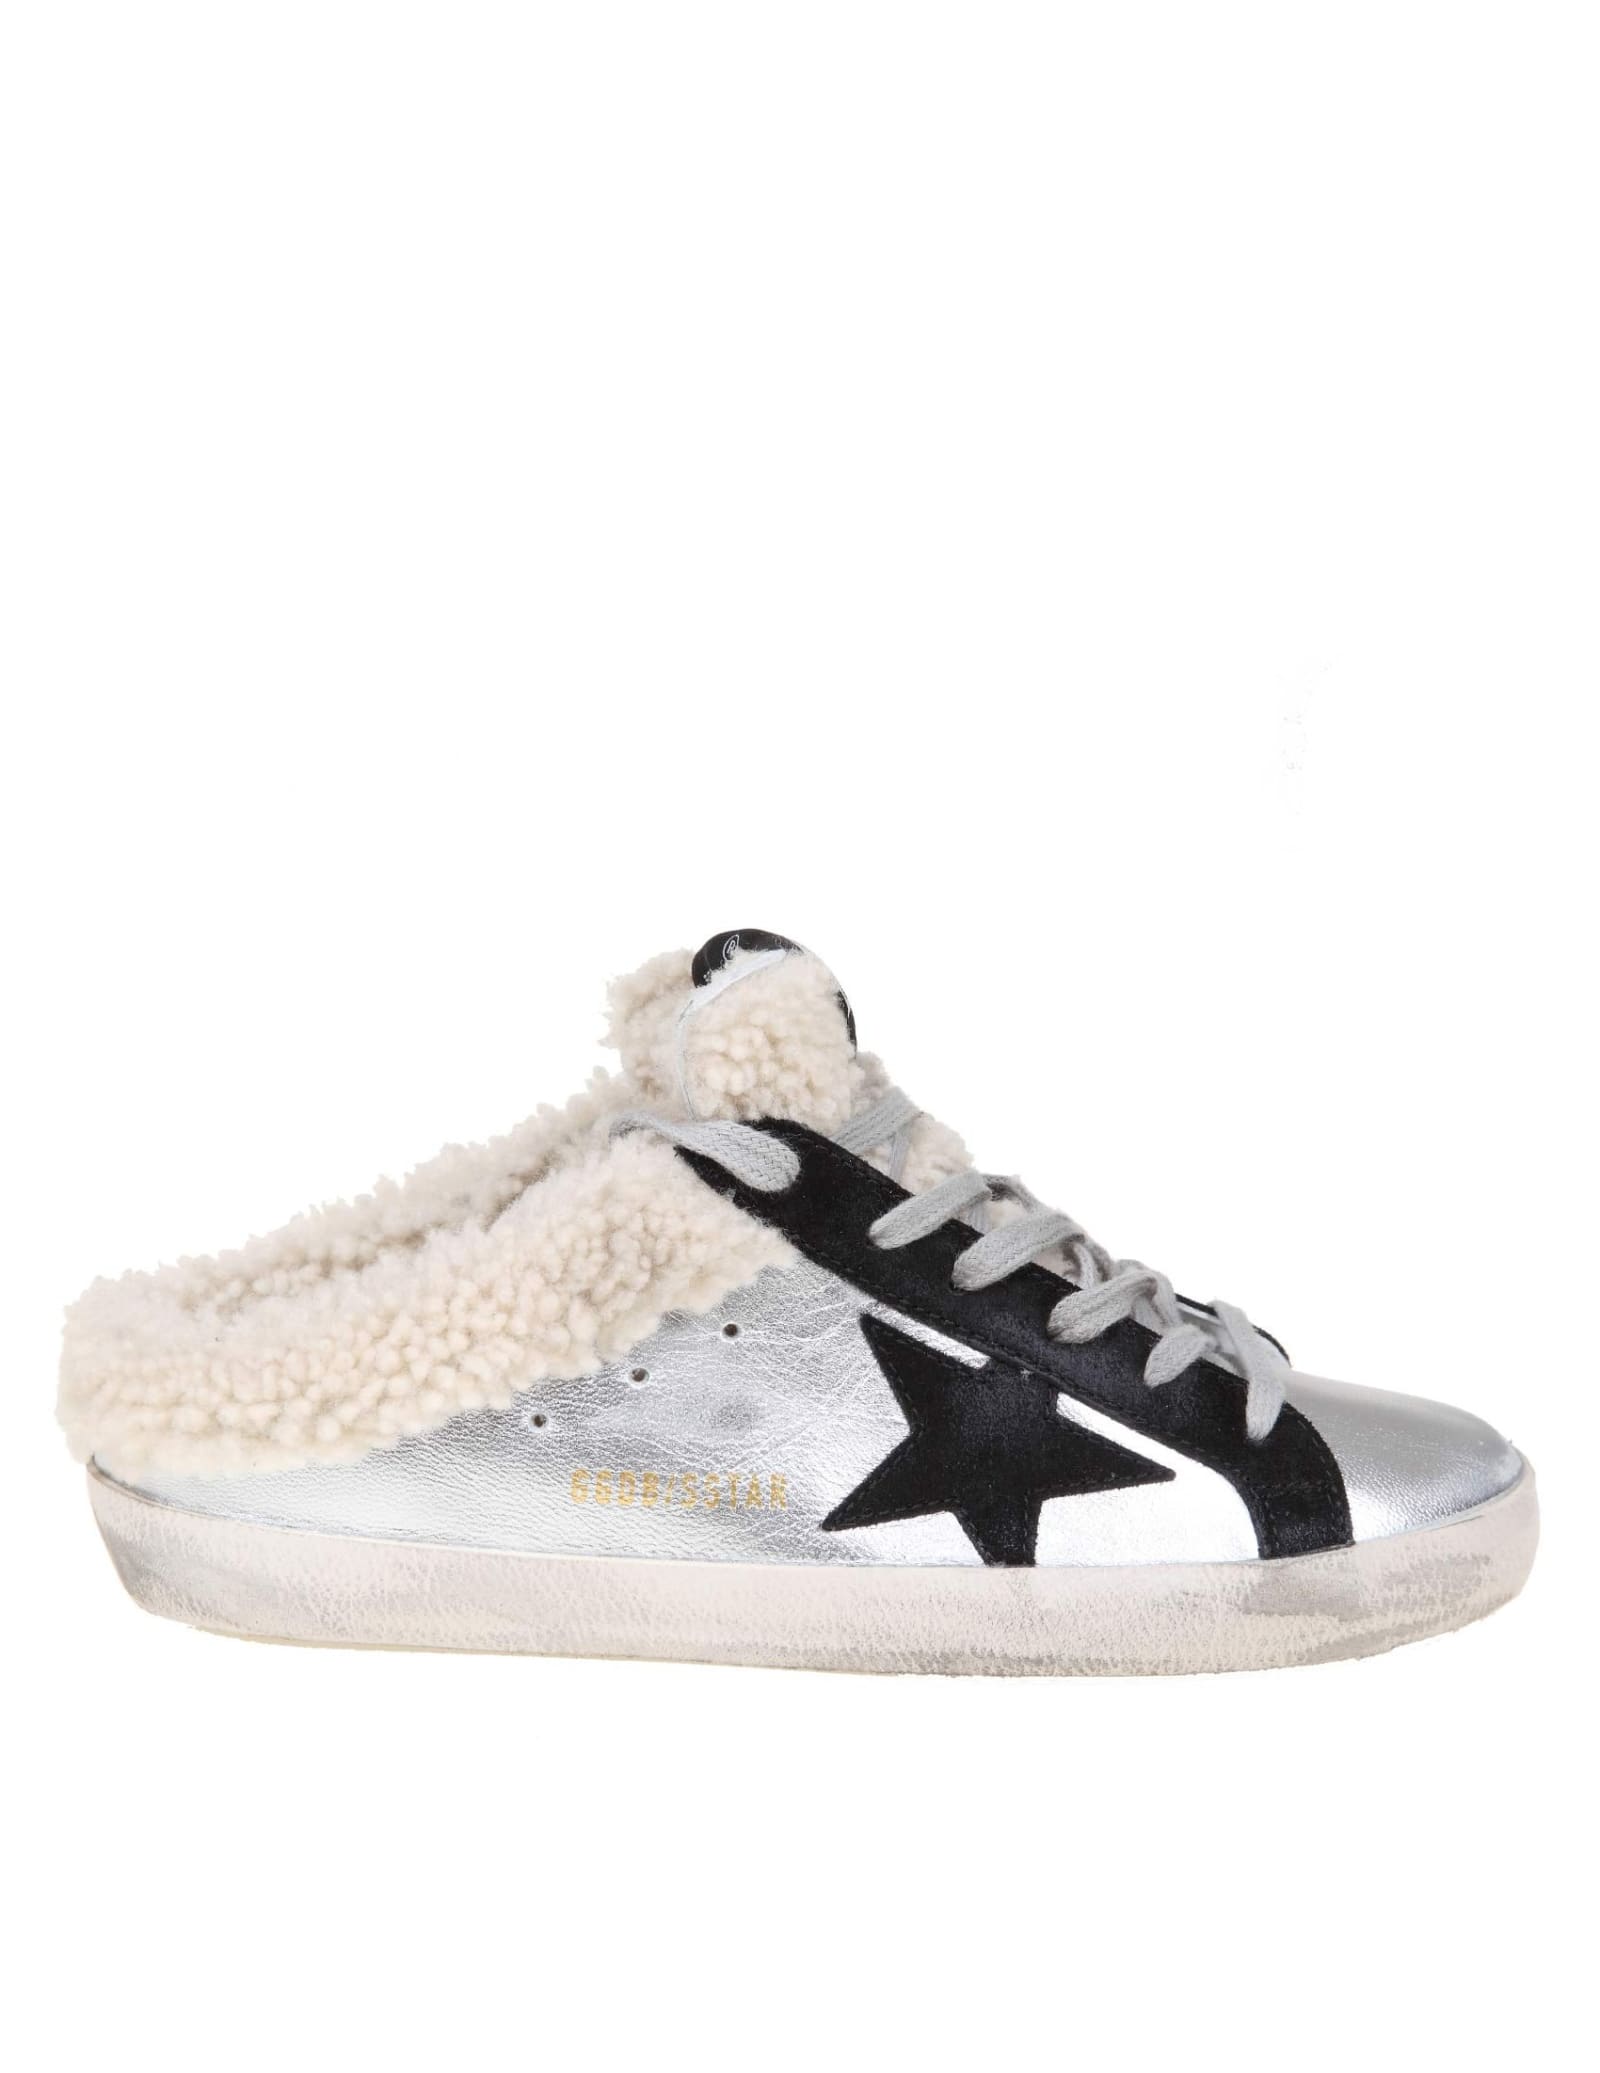 Golden Goose Superstar Sabot In Leather And Shearling